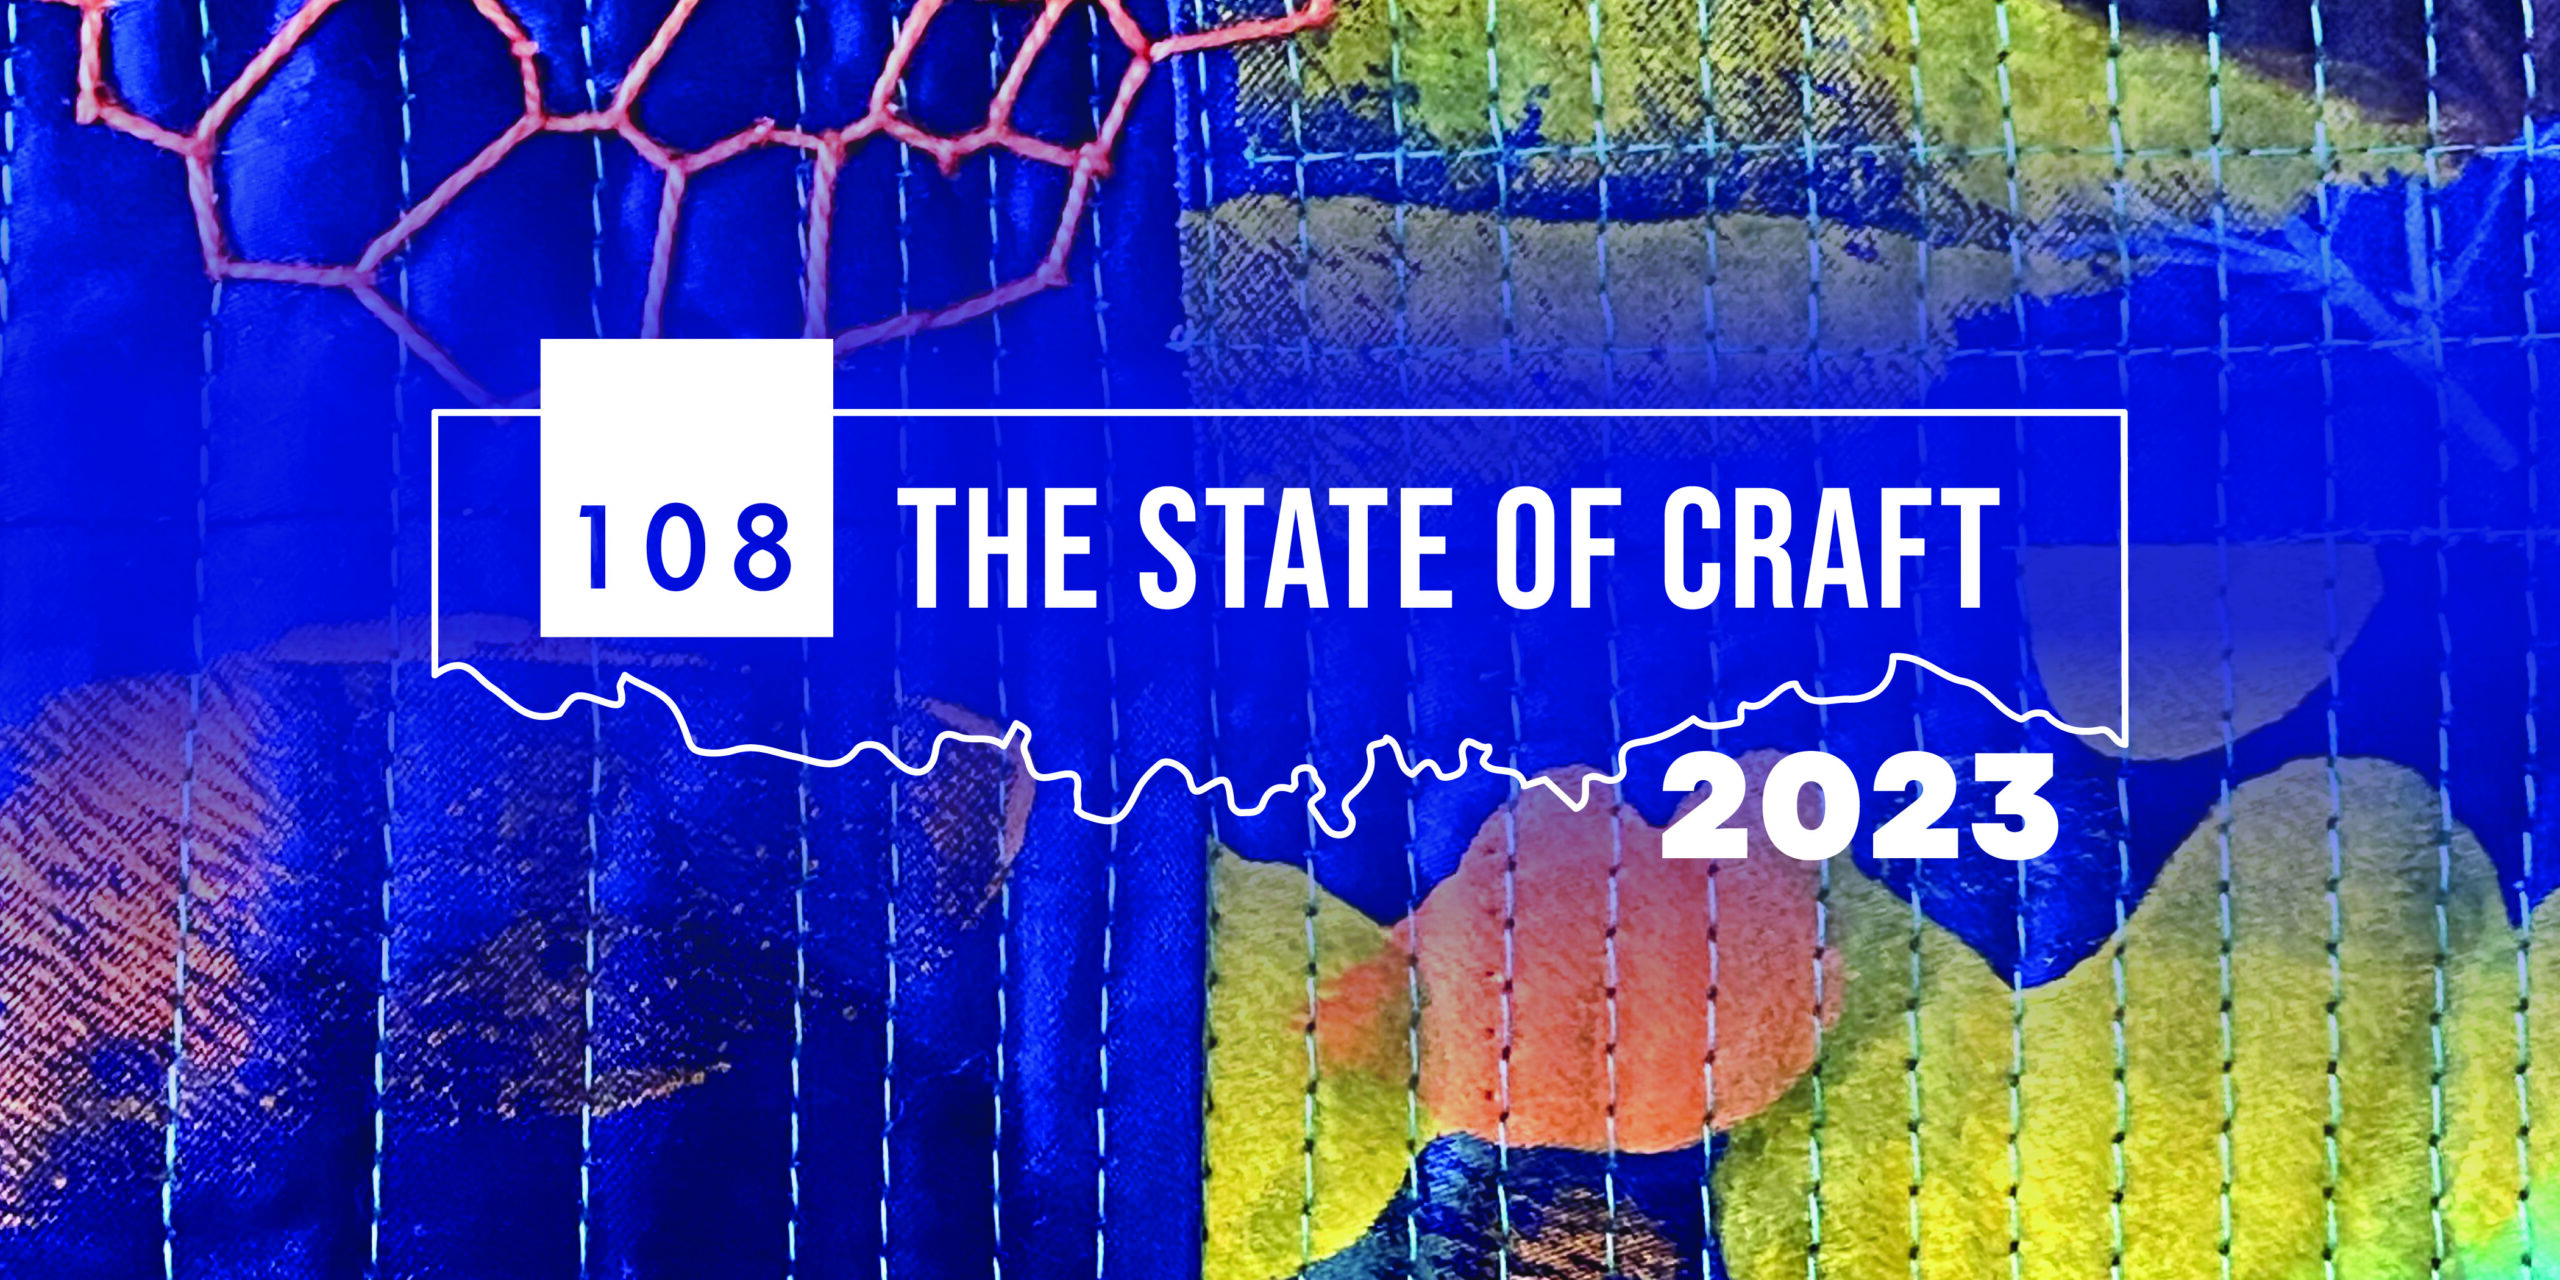 The State of Craft 2023